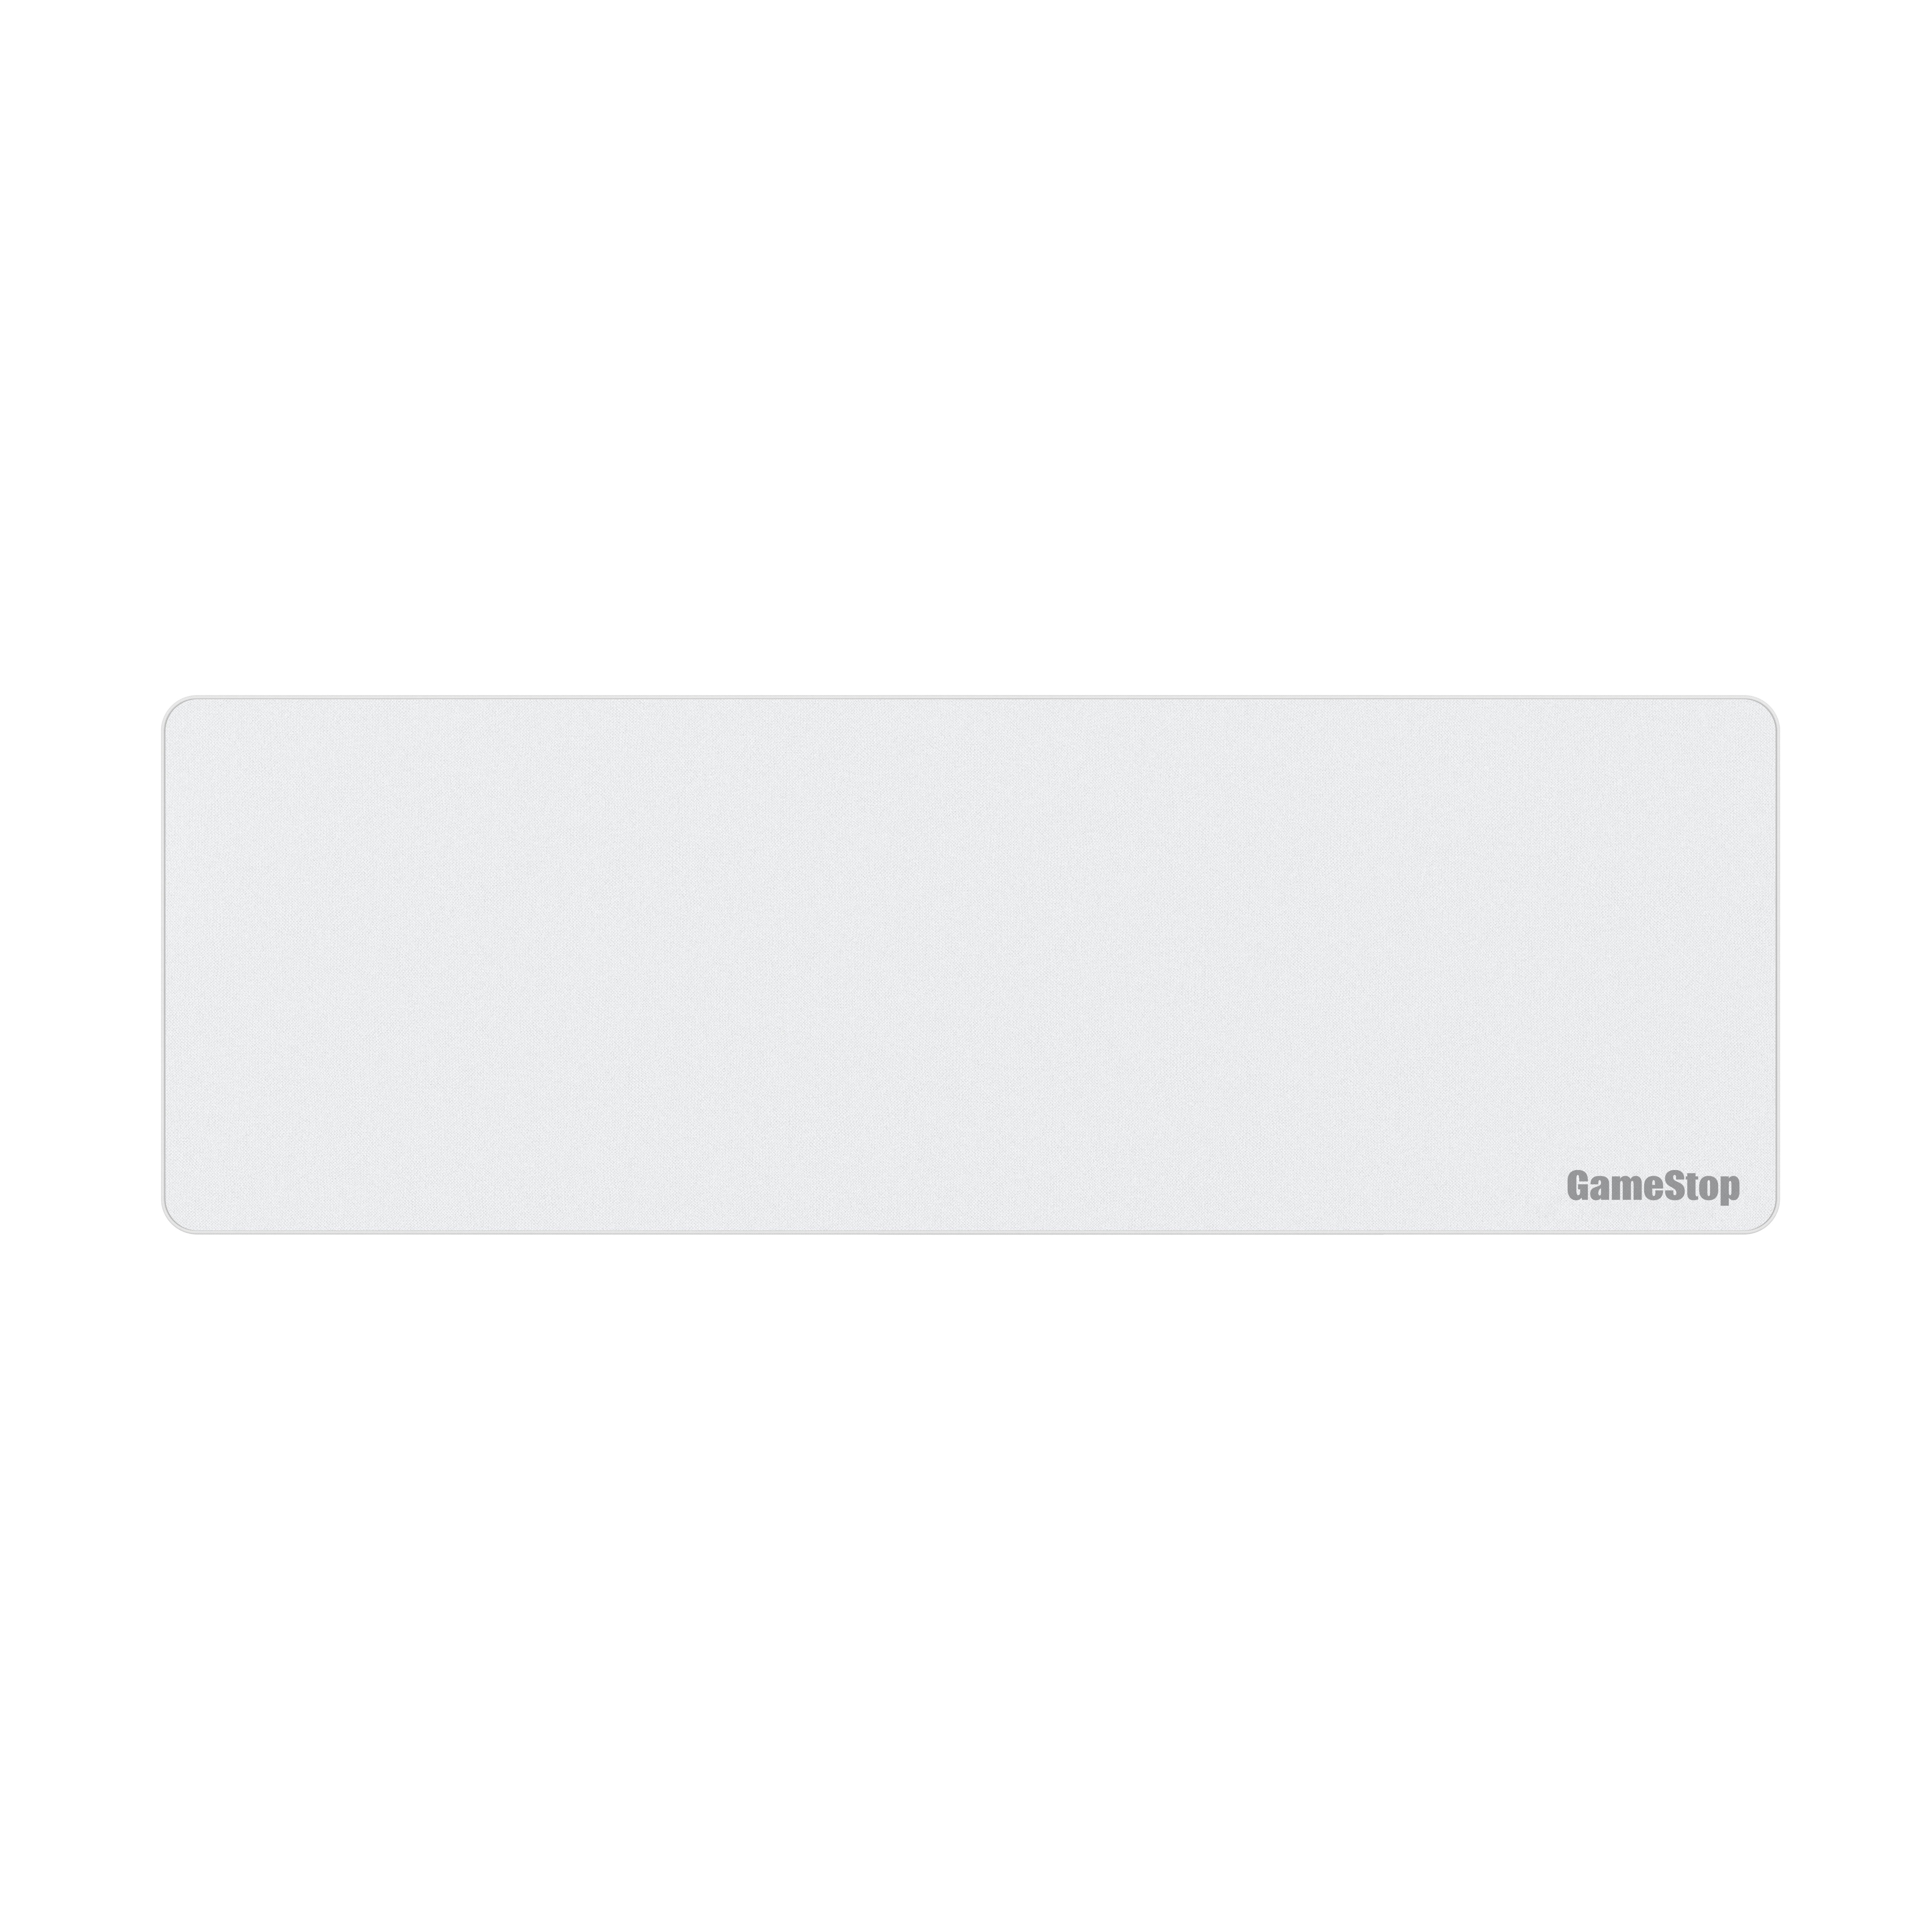 GameStop XXL Gaming Mouse Pad - White